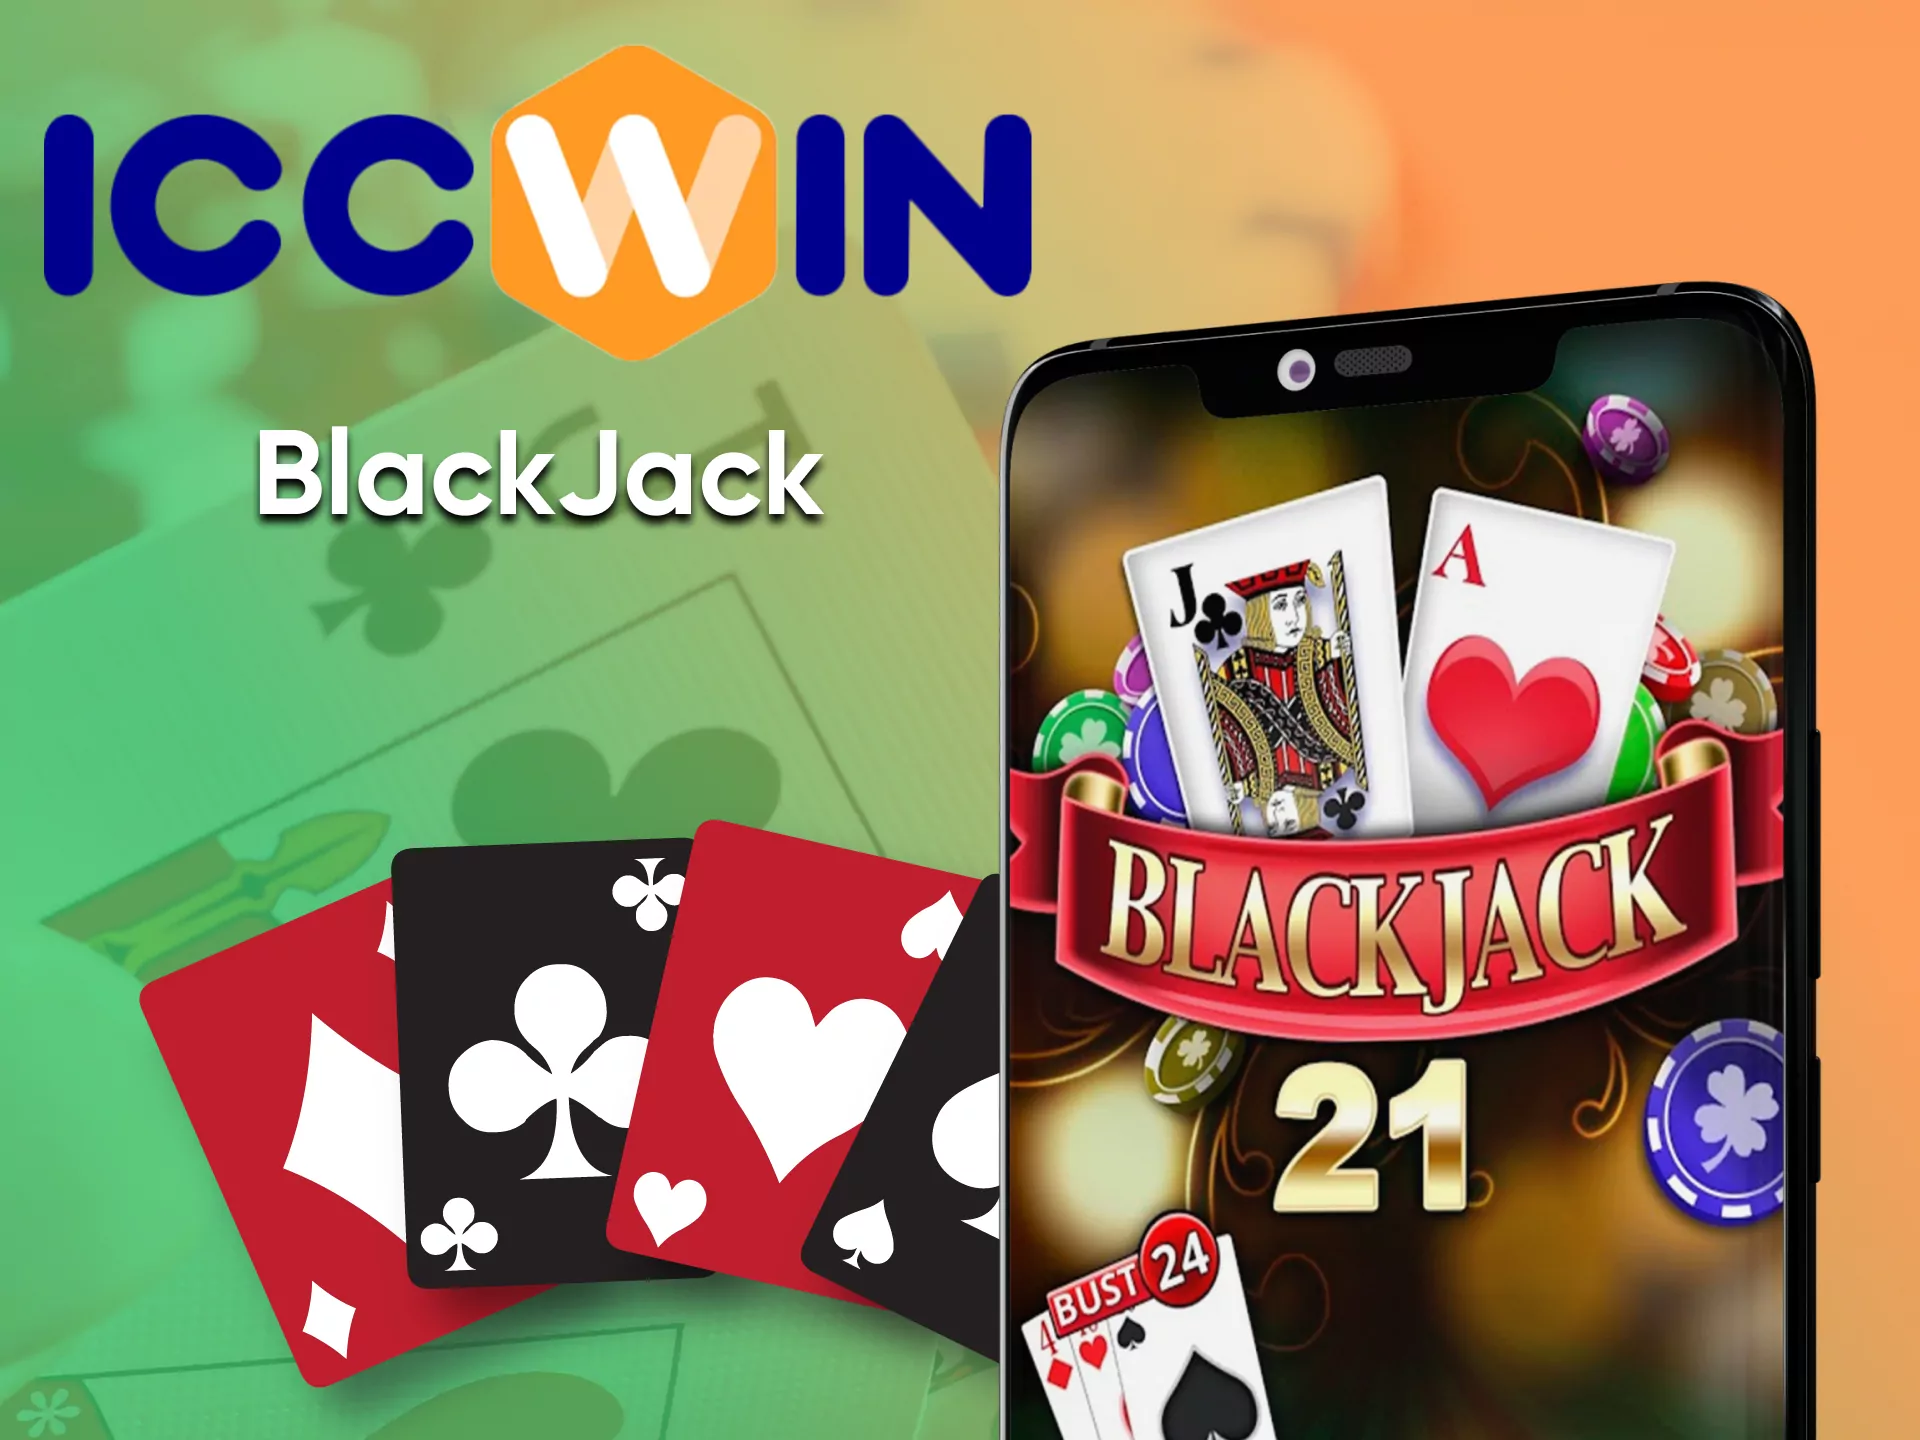 Choose a section with BlackJack from ICCWin.